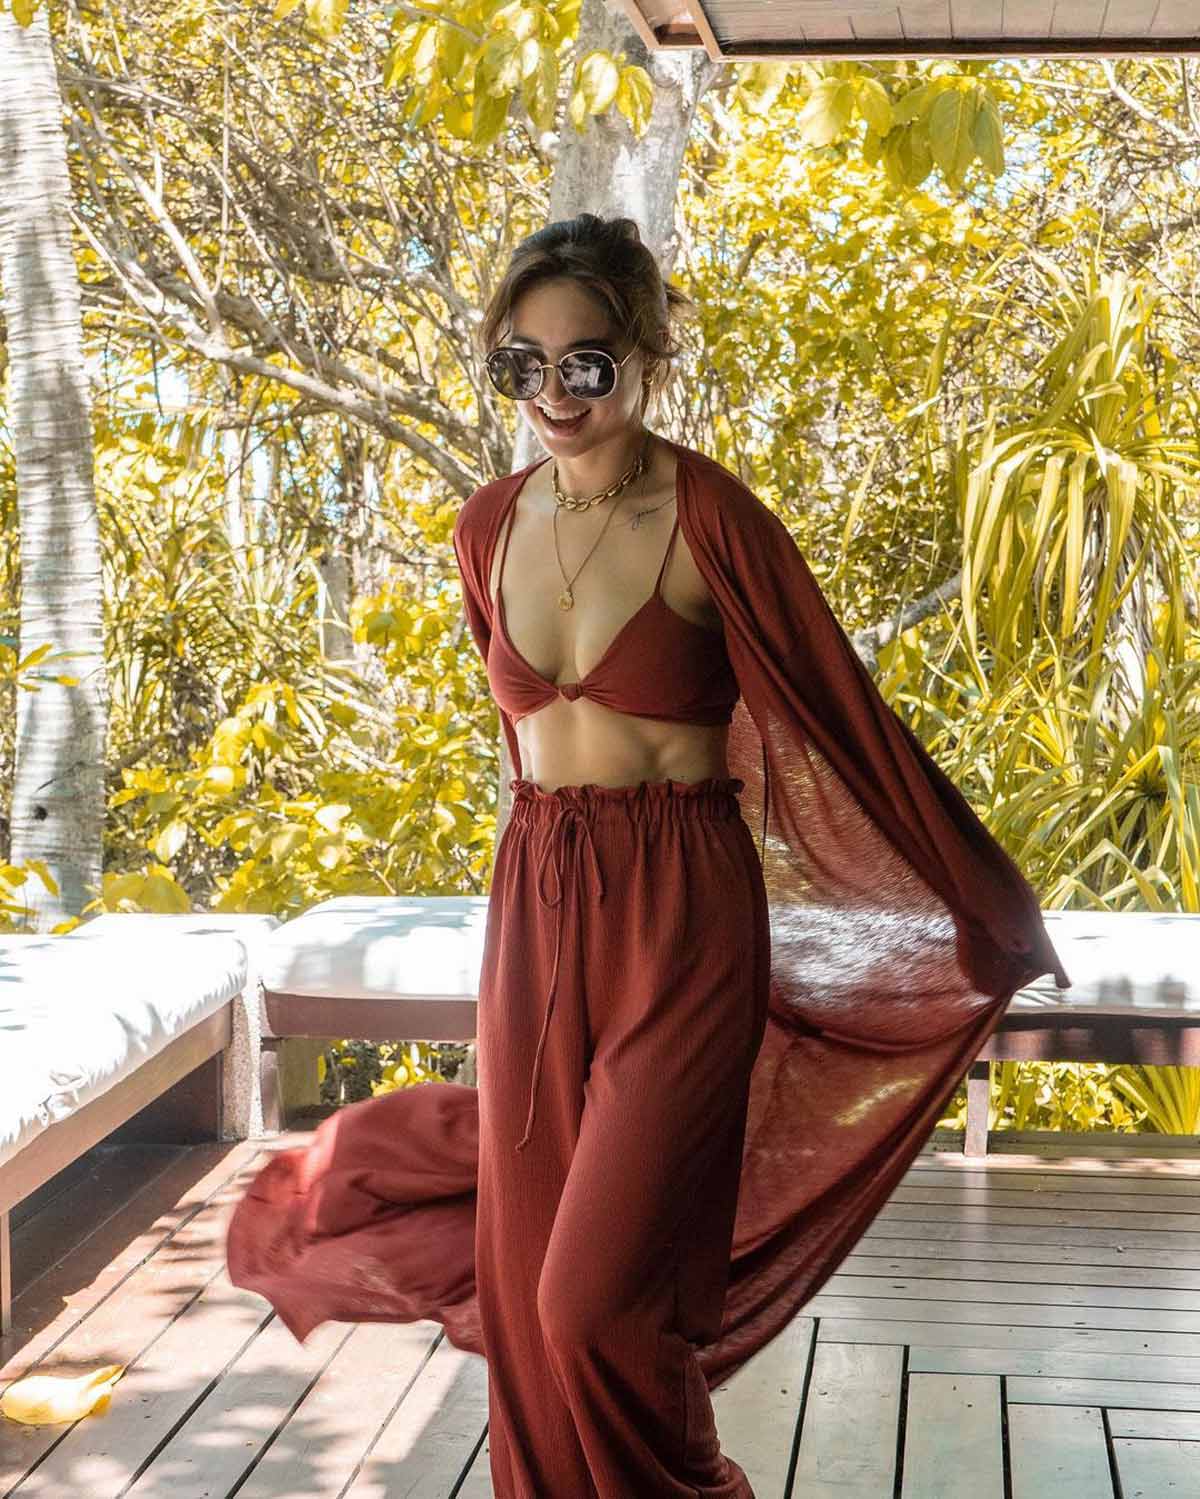 coleen garcia beach outfits to show your abs